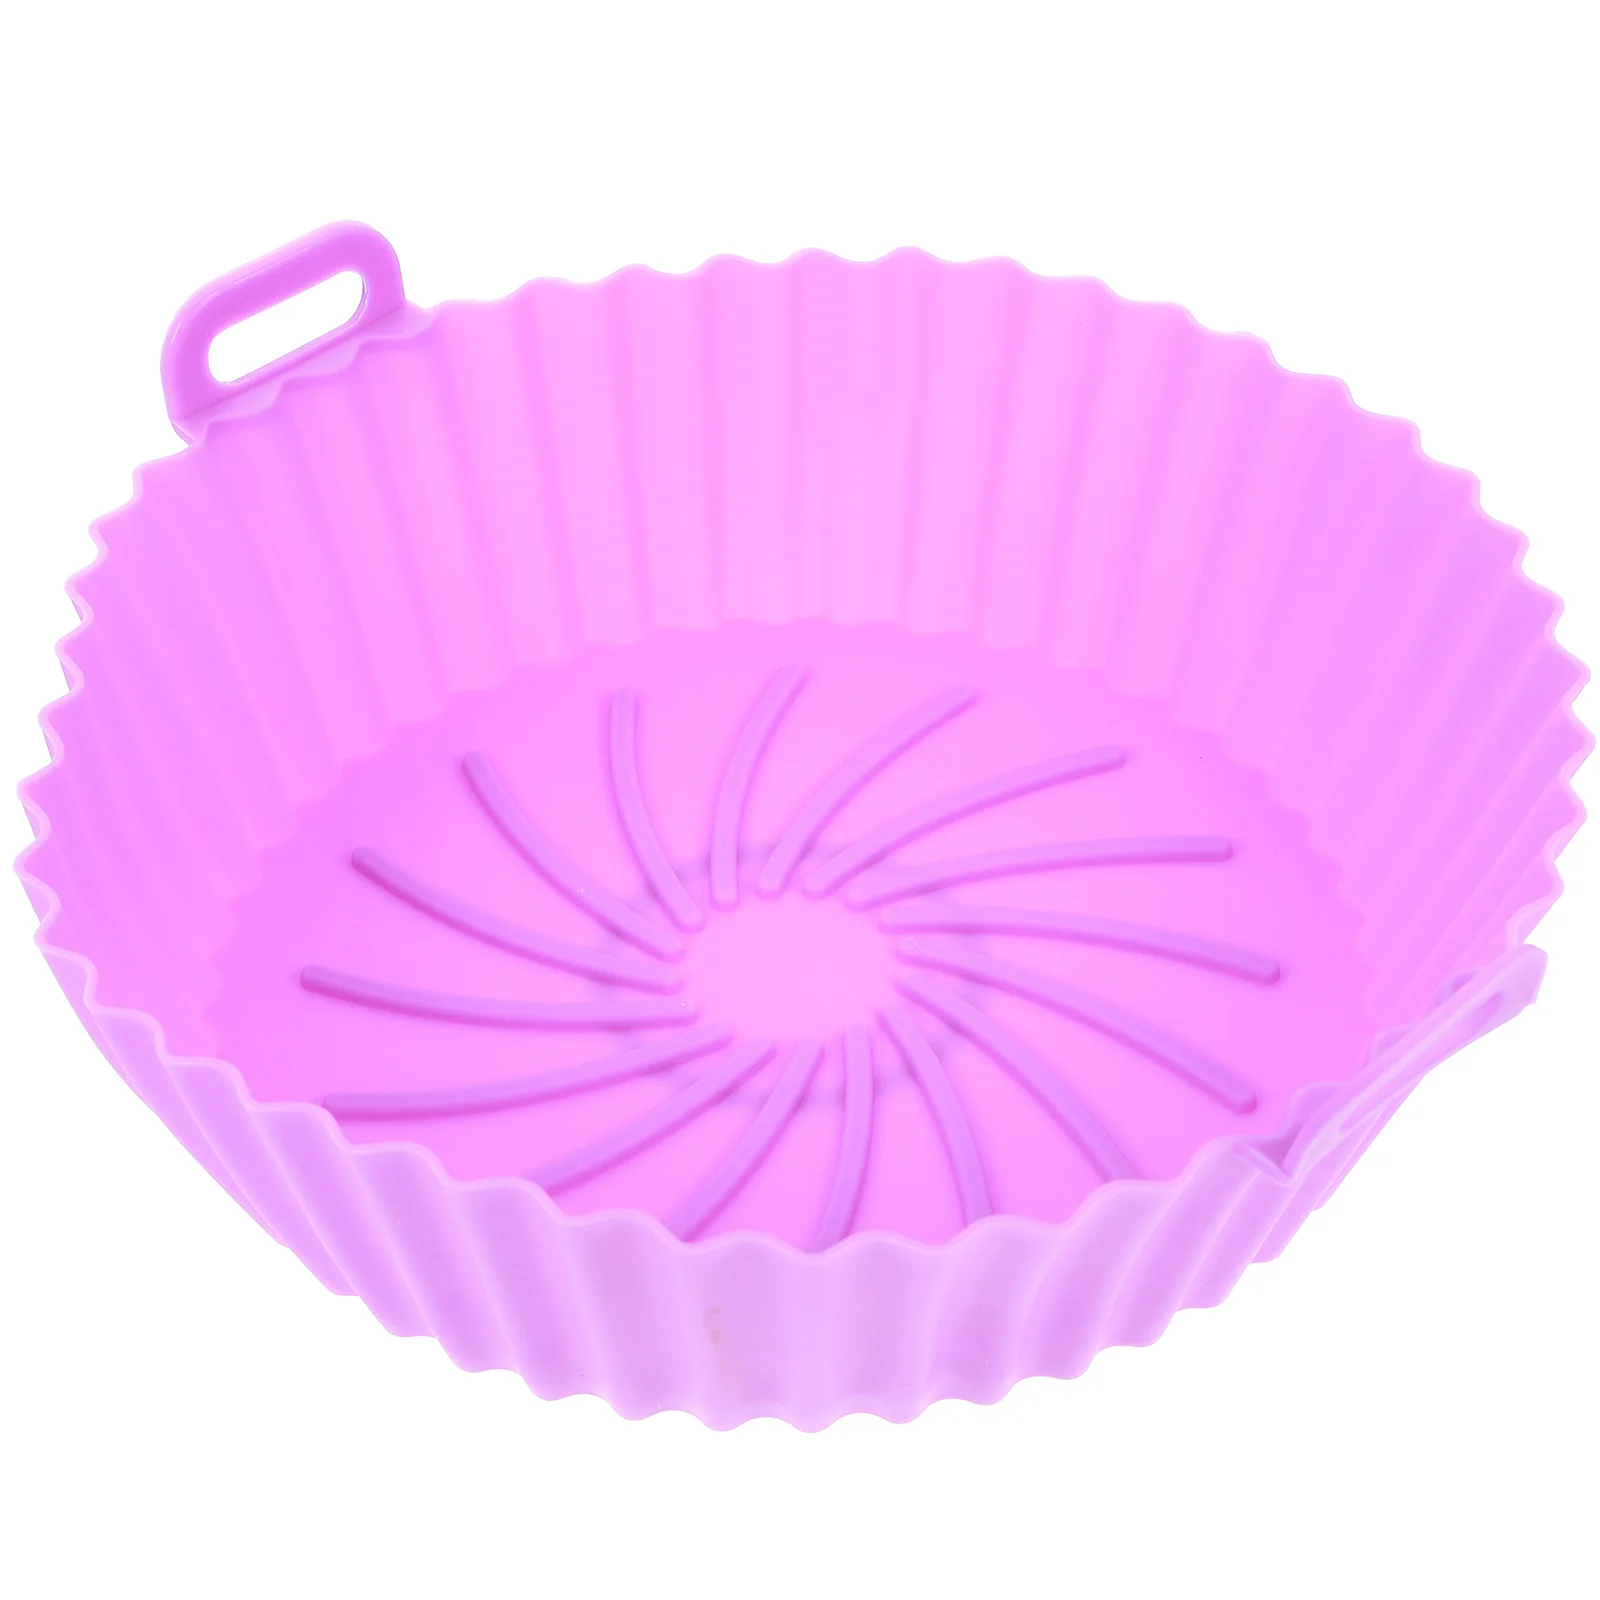 

Air Fryer Silicone Basket Pot Steamer Baking Replacement Accessories Reusable Oven Liners Trivet Lifter Bakeware Pan Insert Tray